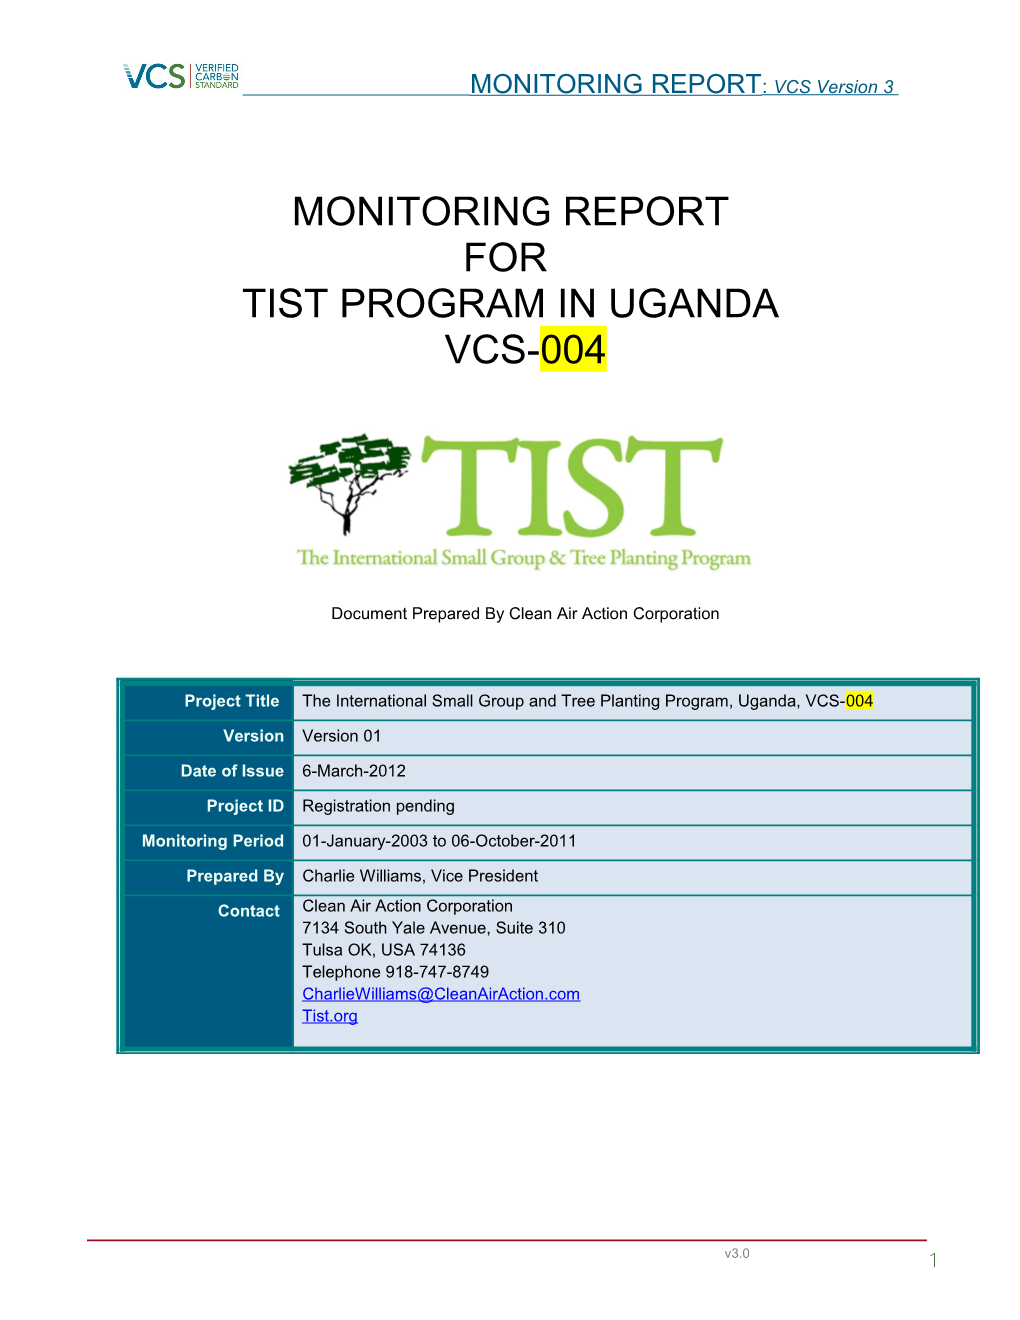 VCS Monitoring Report Template